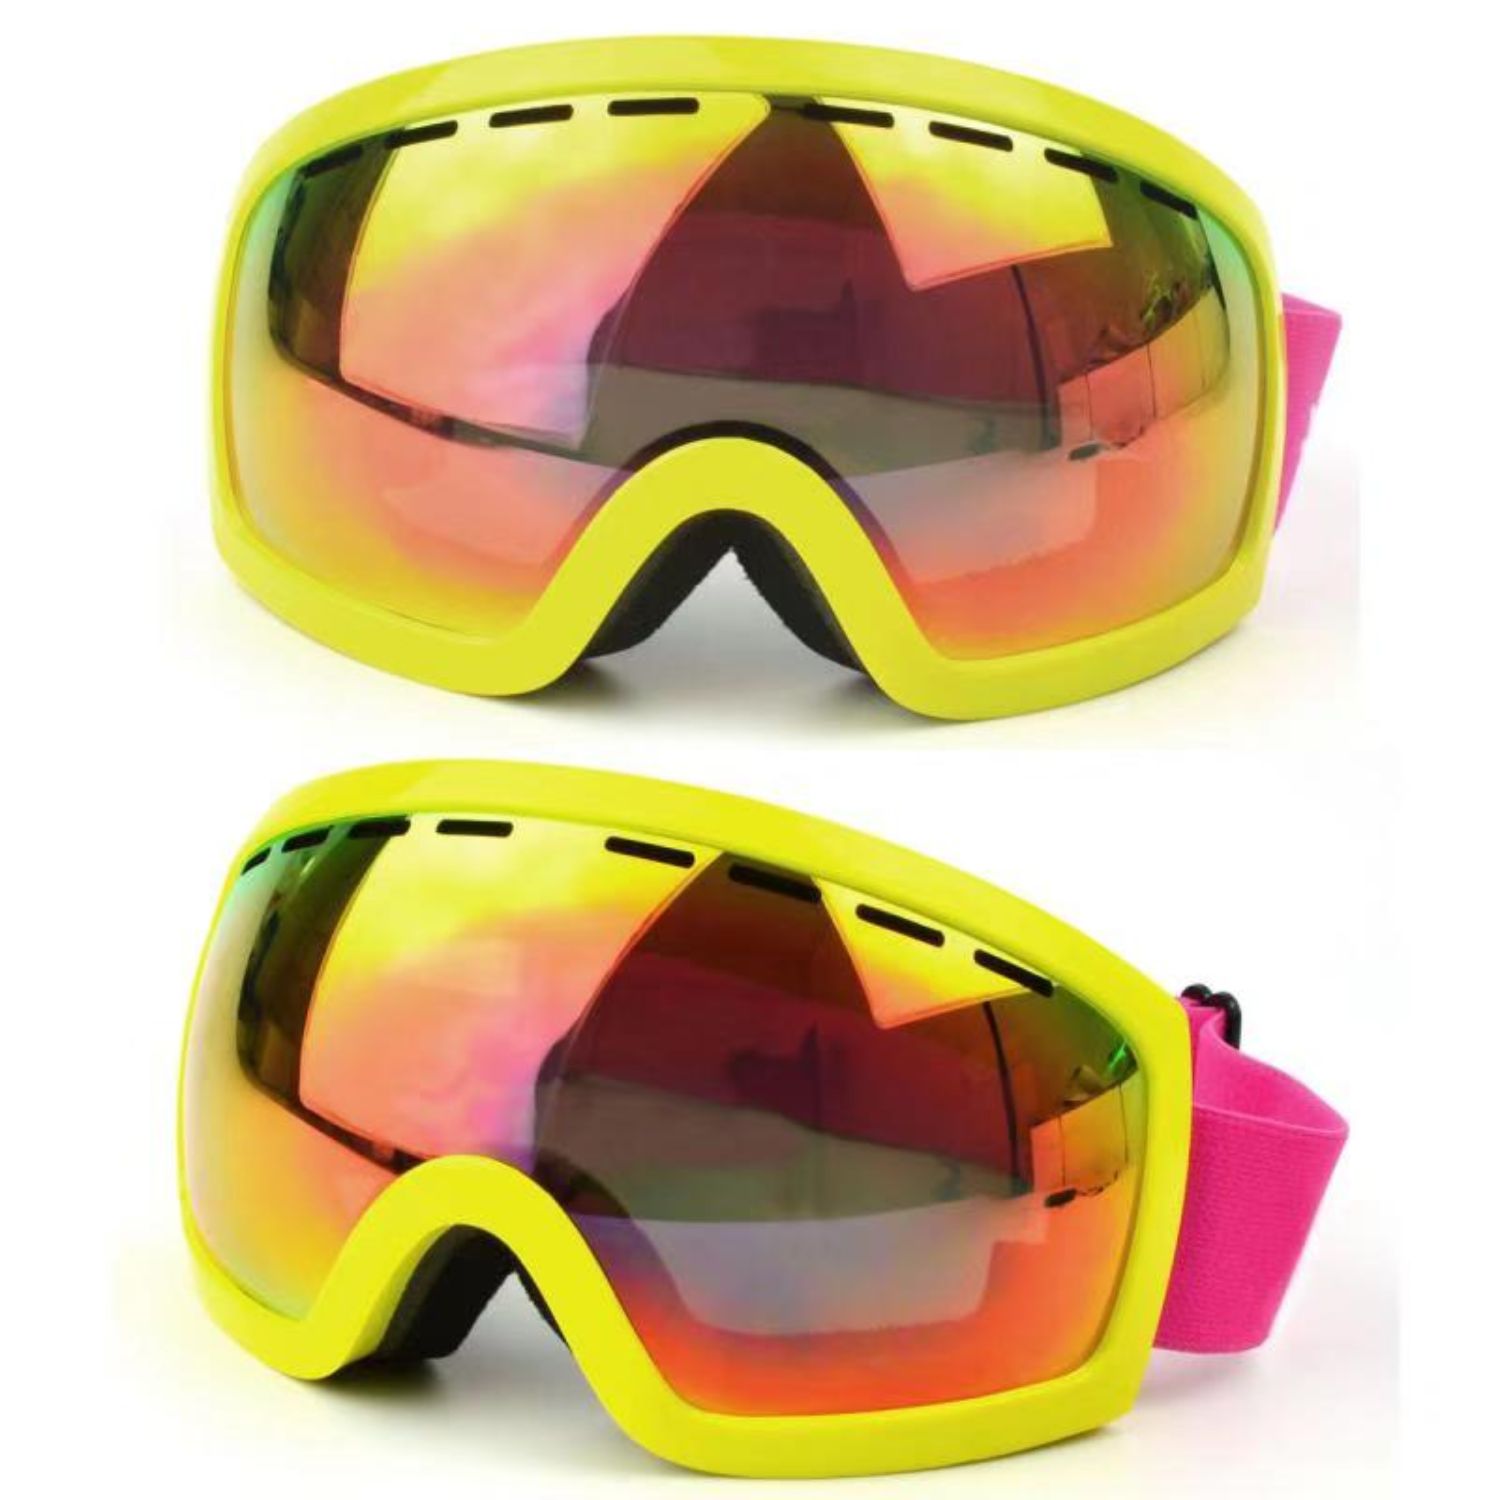 SG04 - Ski Snowboard Outdoor UV Protection GOGGLES for Men and Women